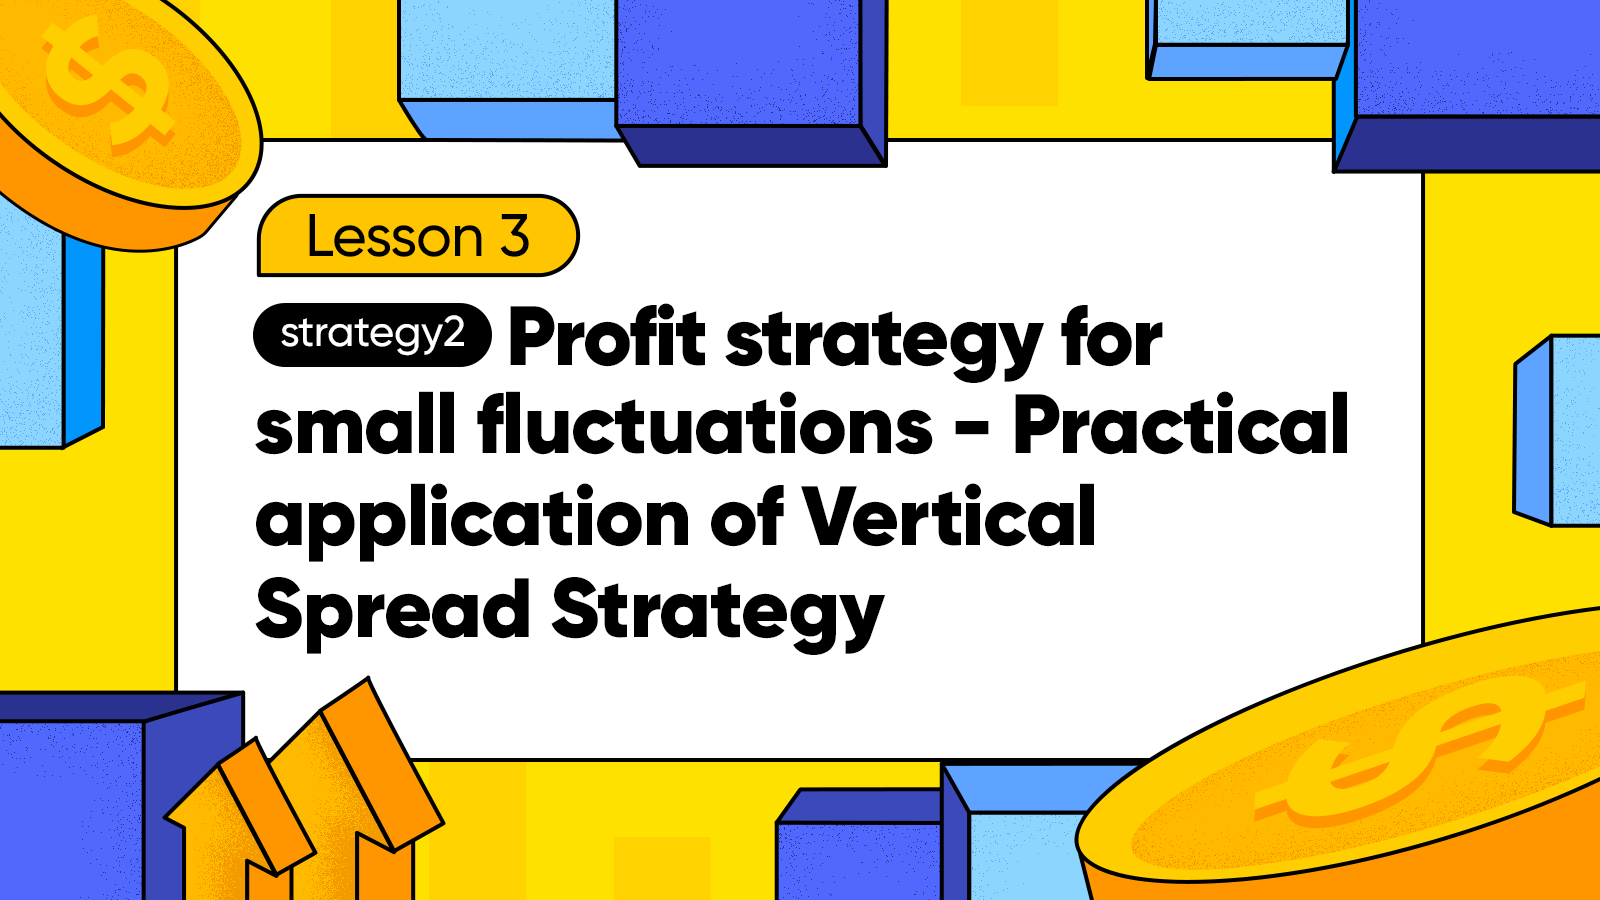 3.1Practical Application of Vertical Spread Strategy